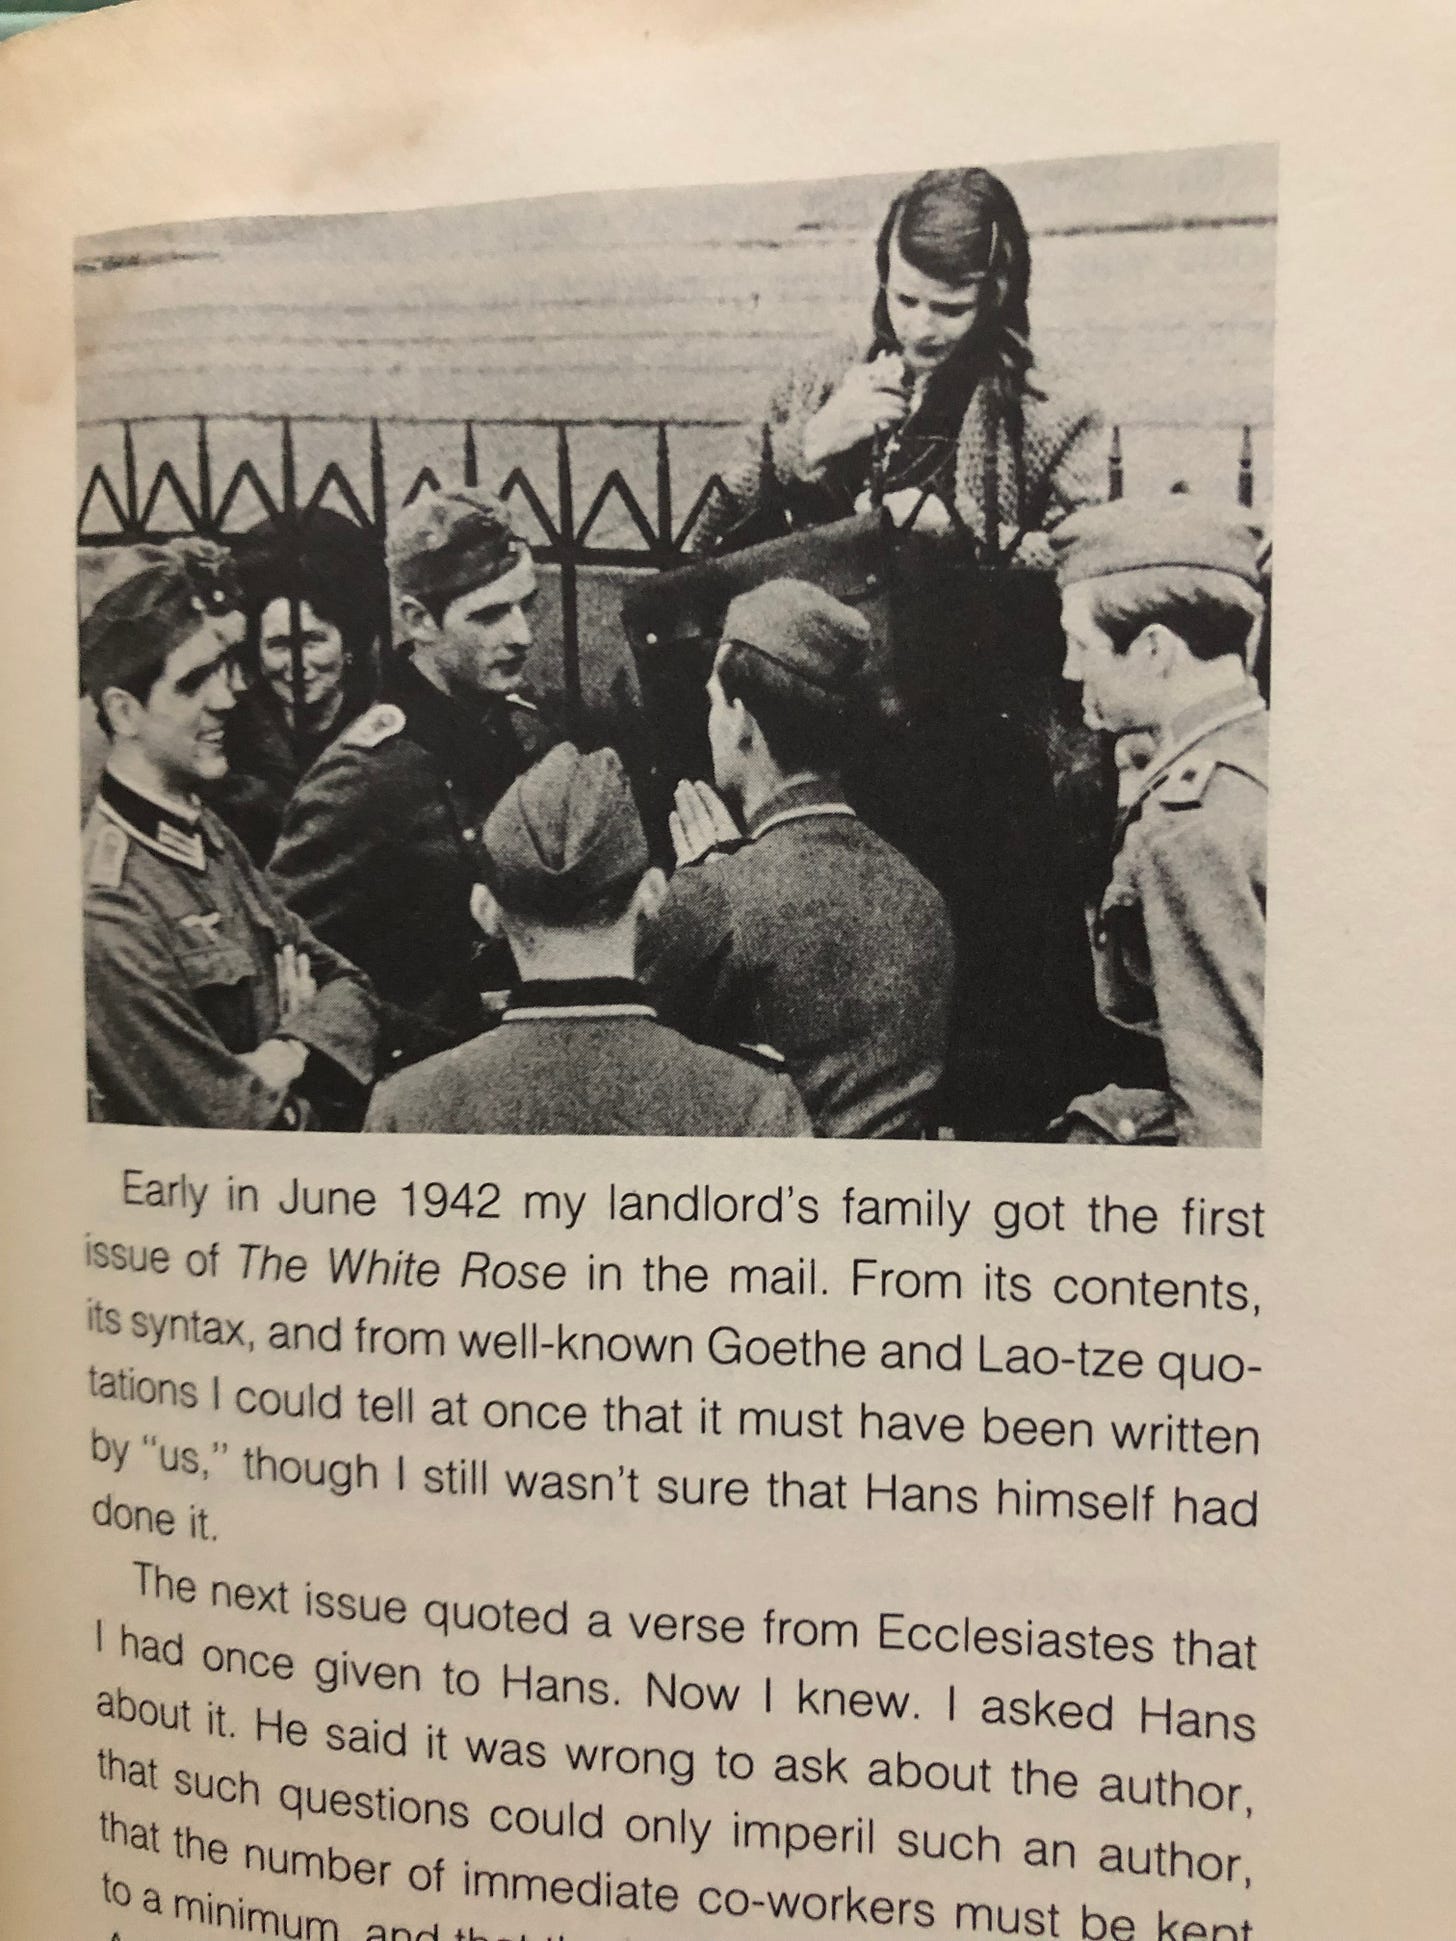 Picture from Hermann Vinke book, which shows an old photo circa 1942 of Sophie at a gate, while her brother and friends (and other members of the White Rose) are on the other side of it, in their full military uniforms.